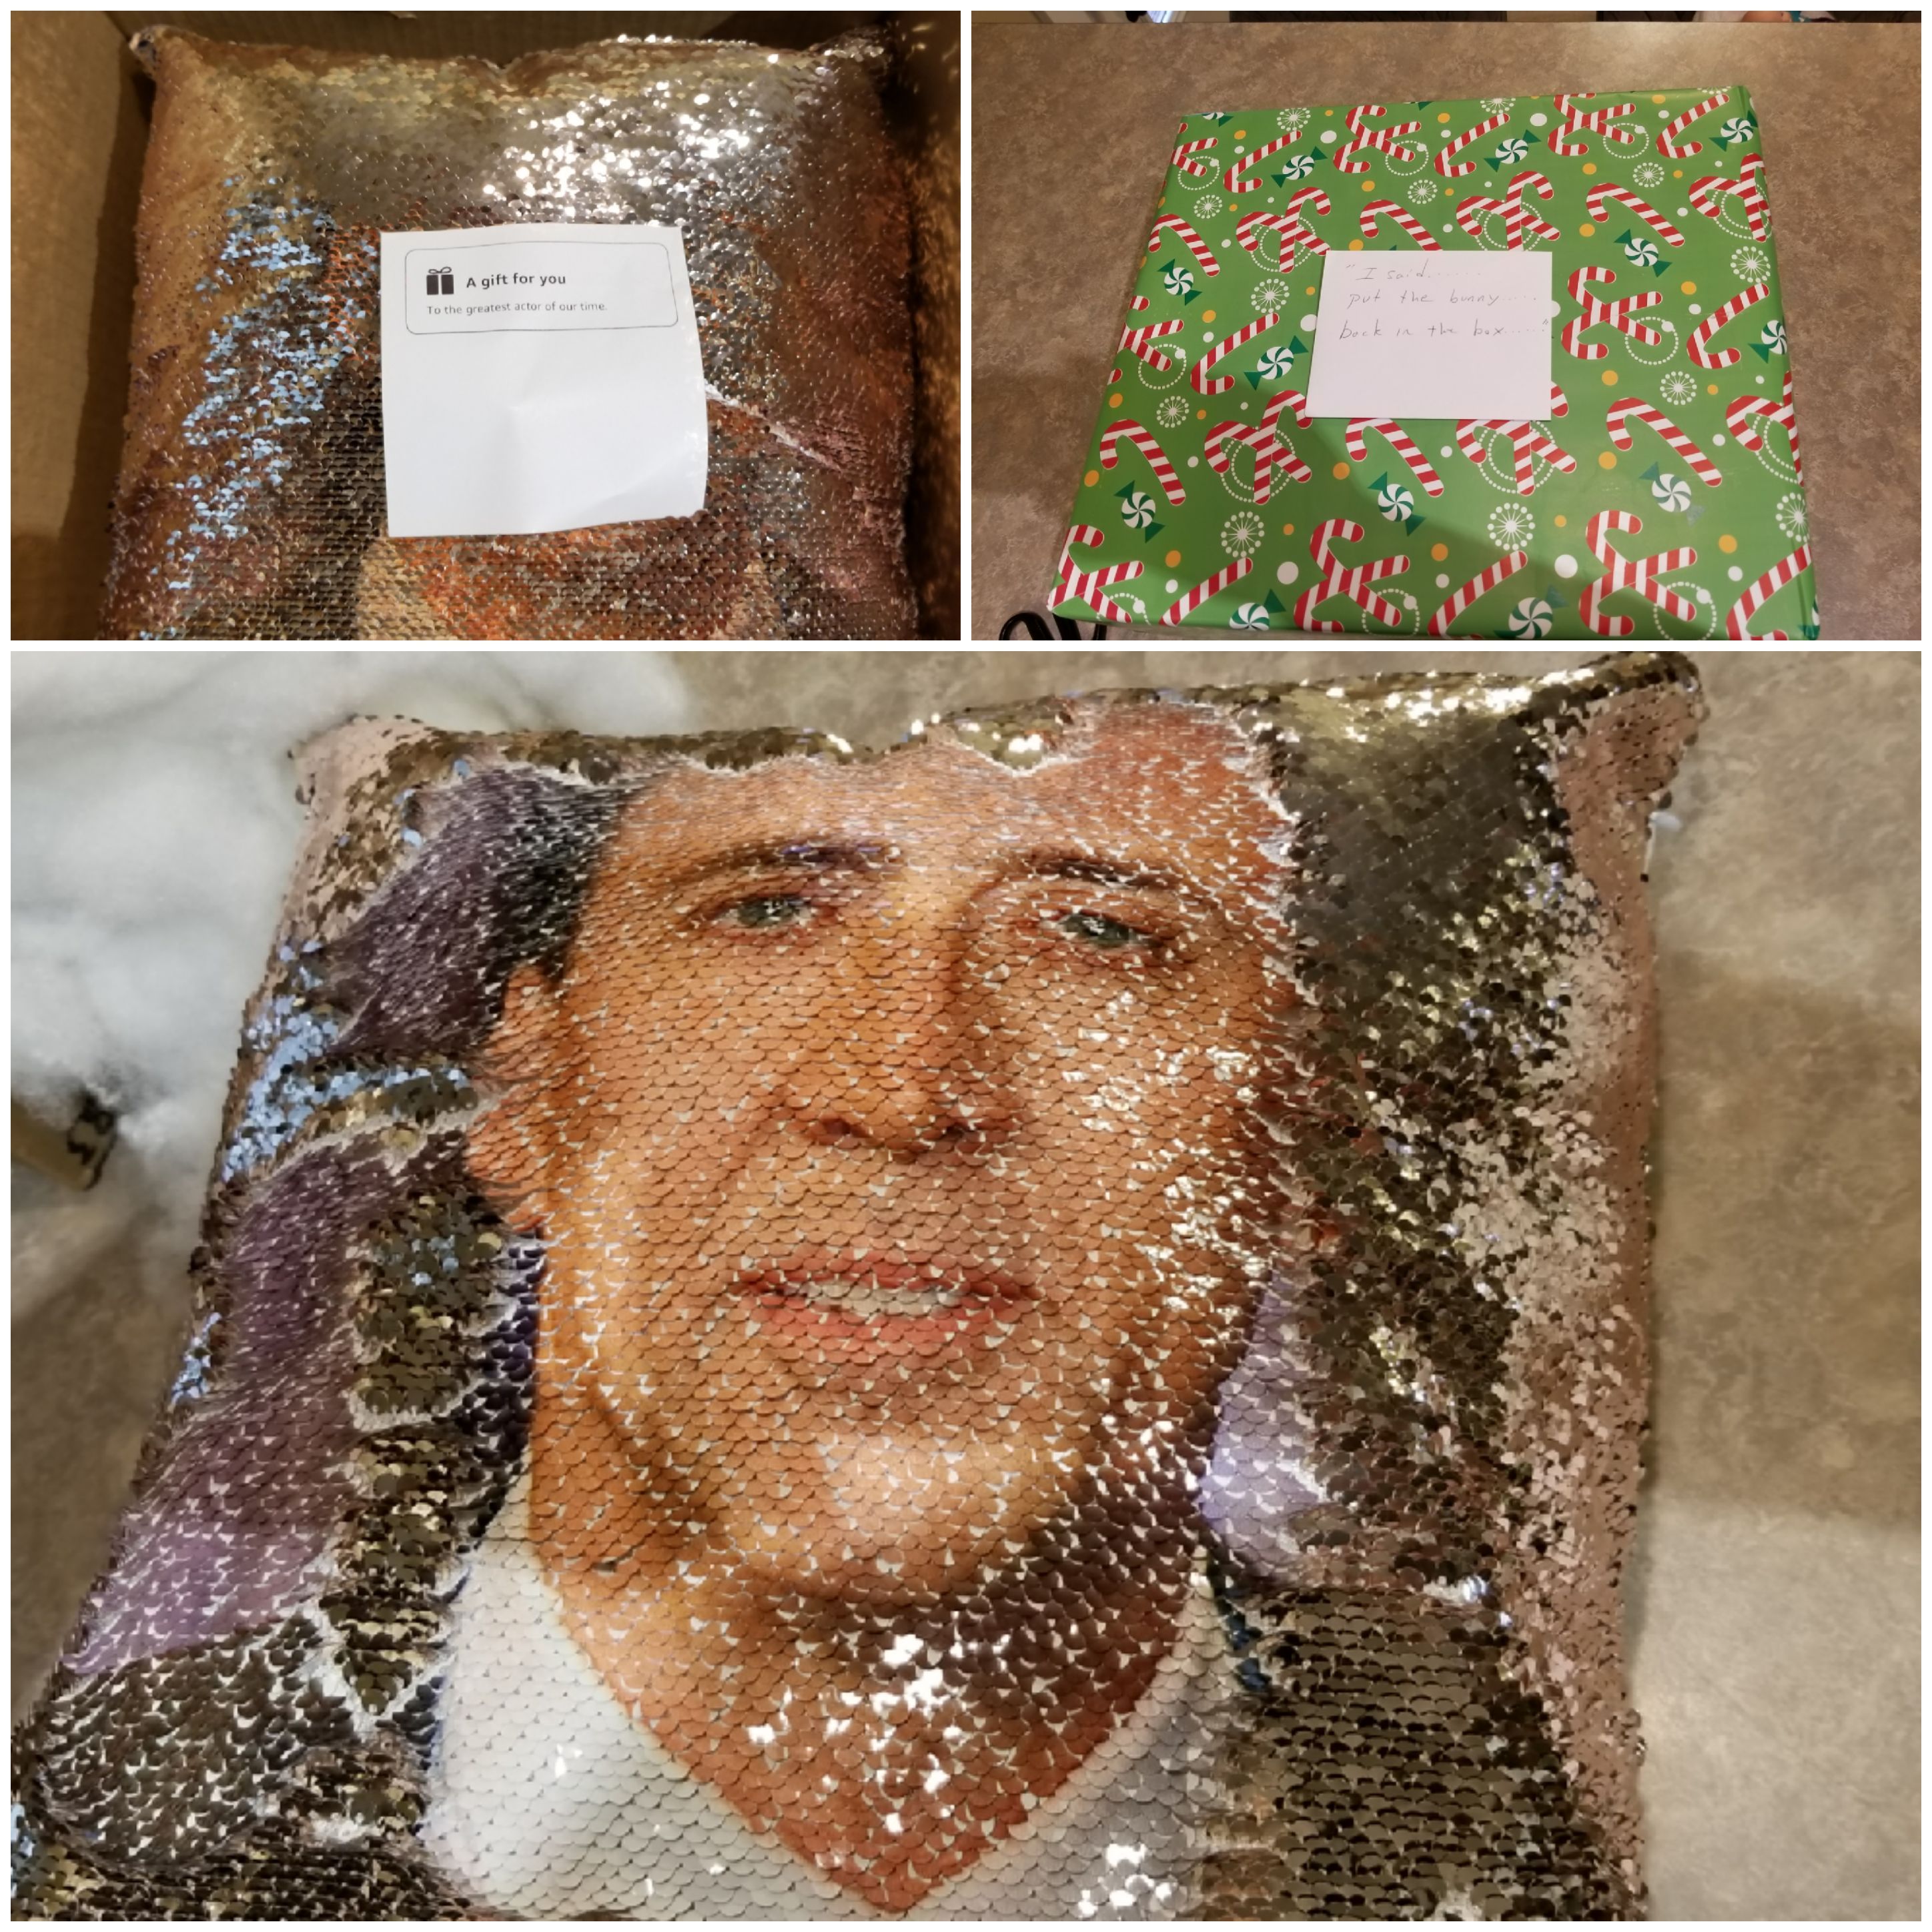 My wife absolutely hates with a dark seeded passion, Nicholas Cage.